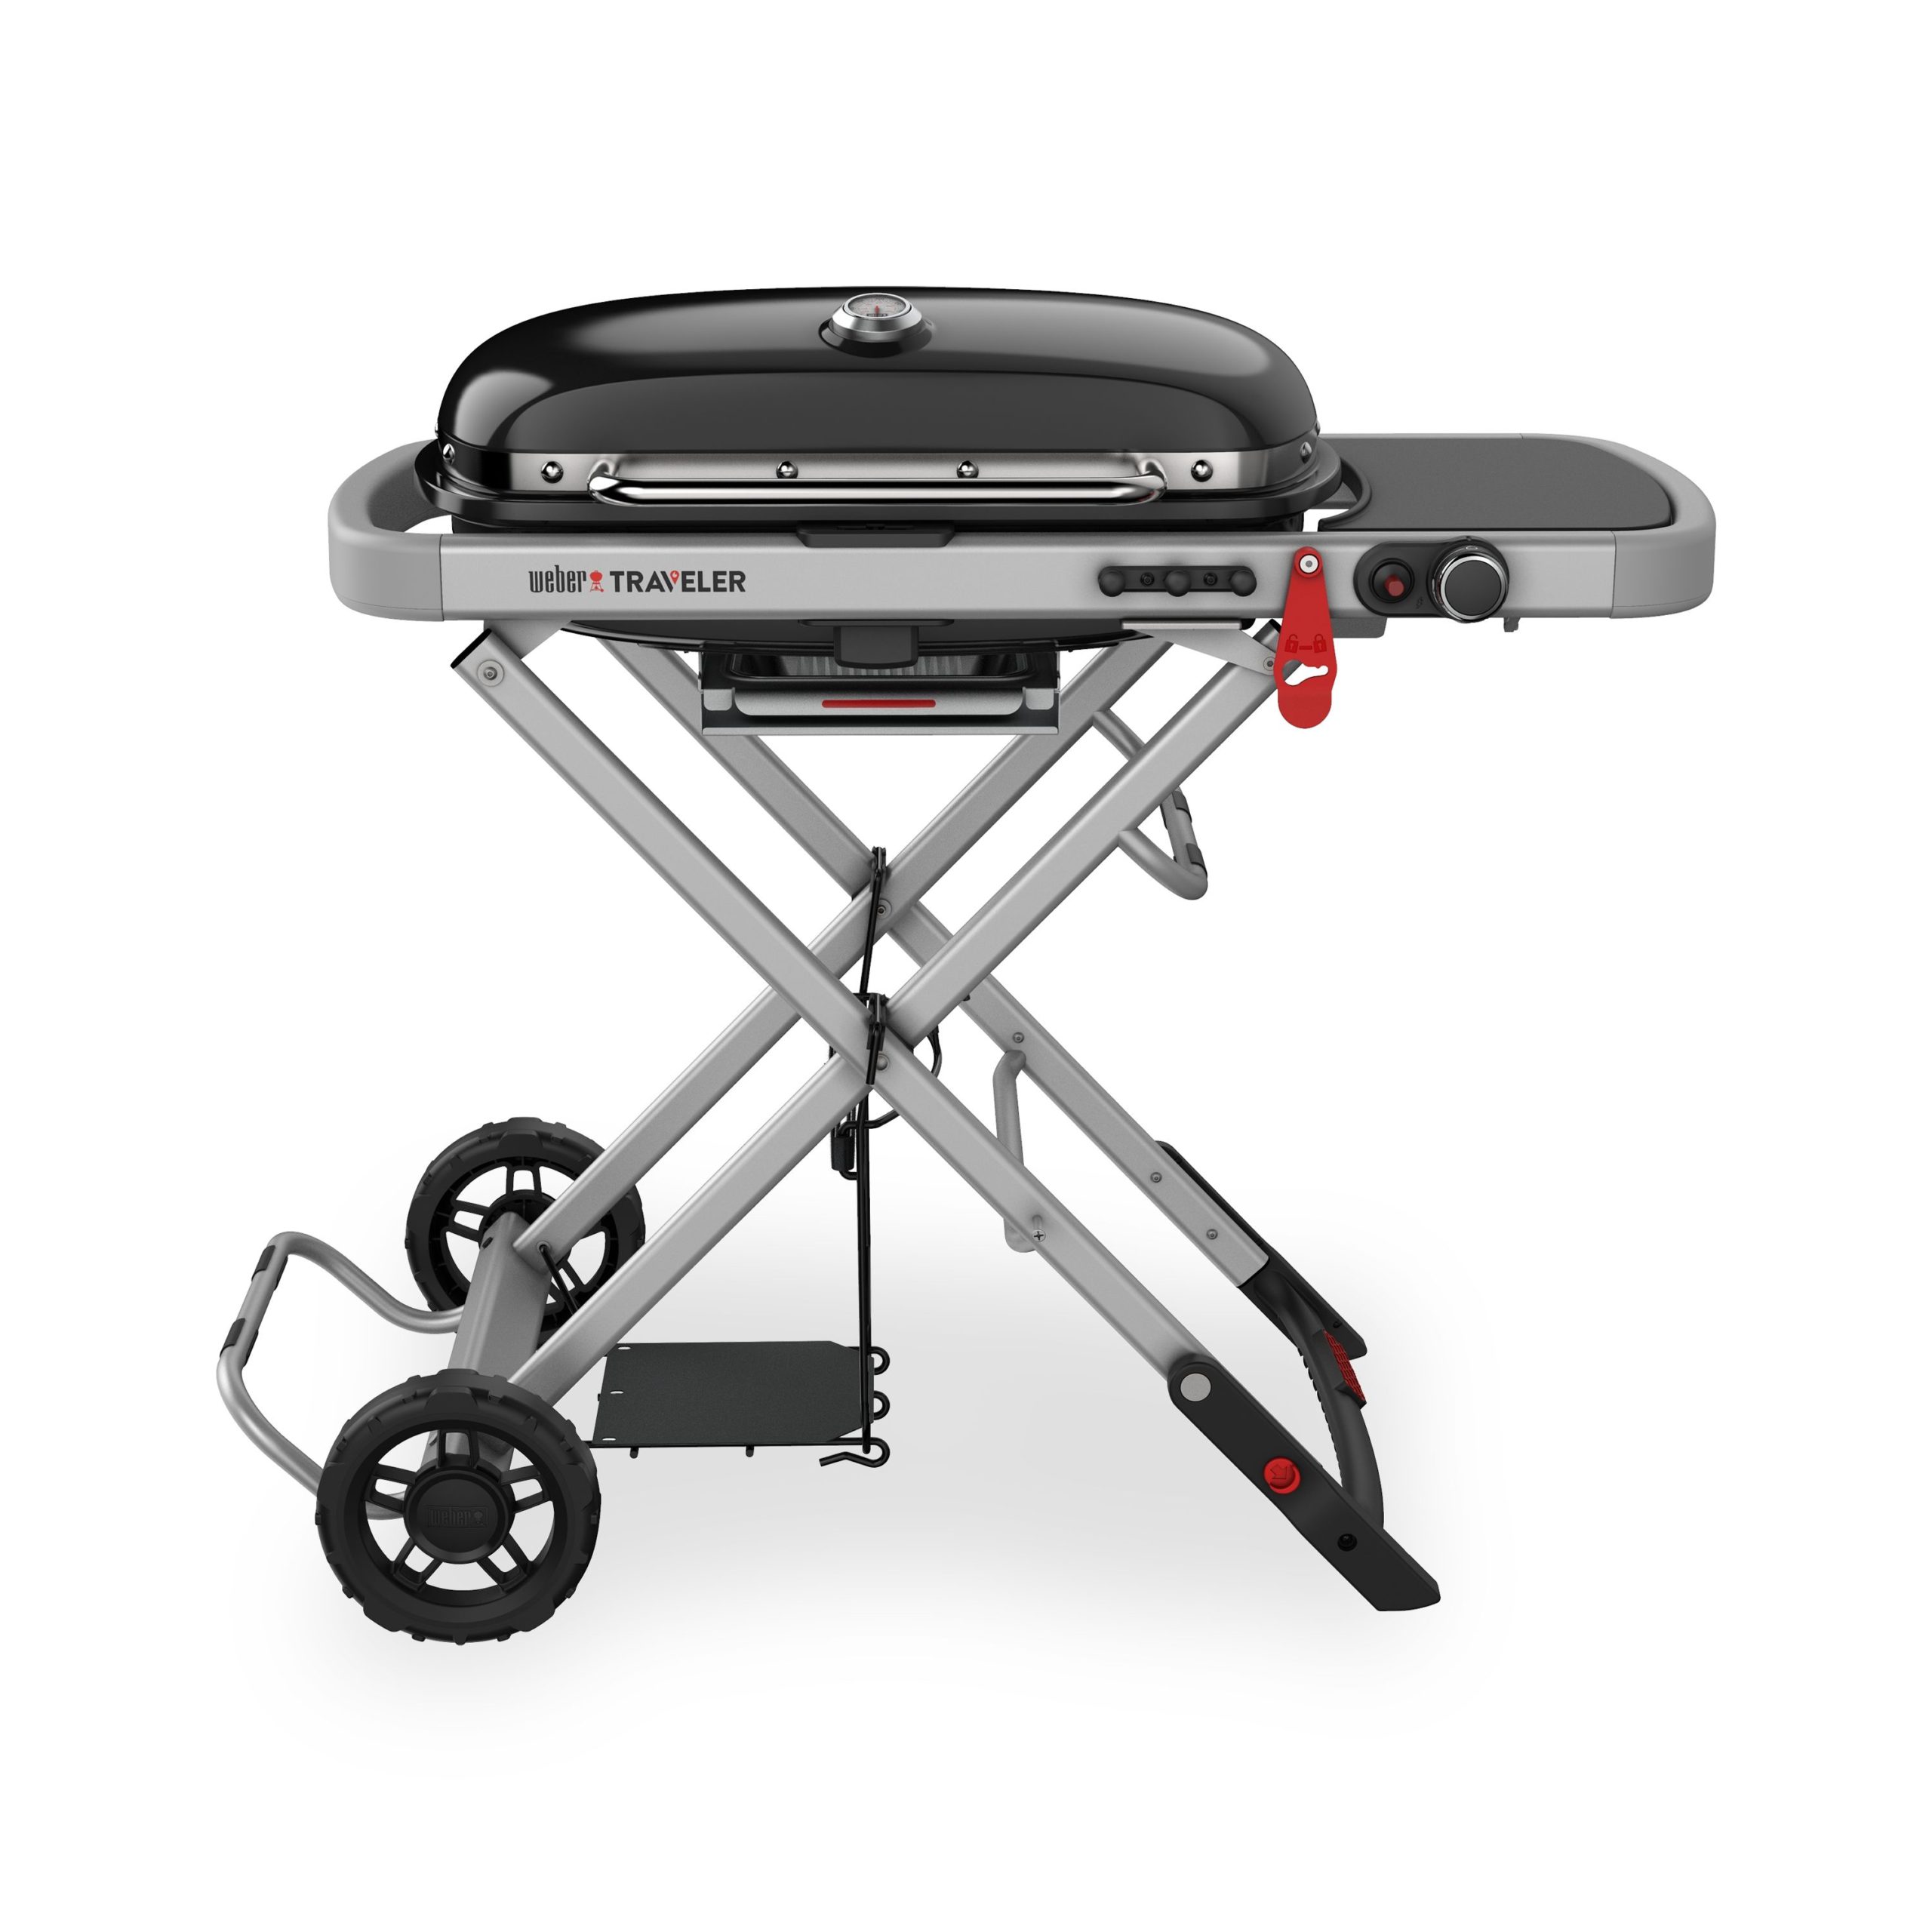 Weber Traveler Black is for anyone who wants delicious barbecued food away from home.